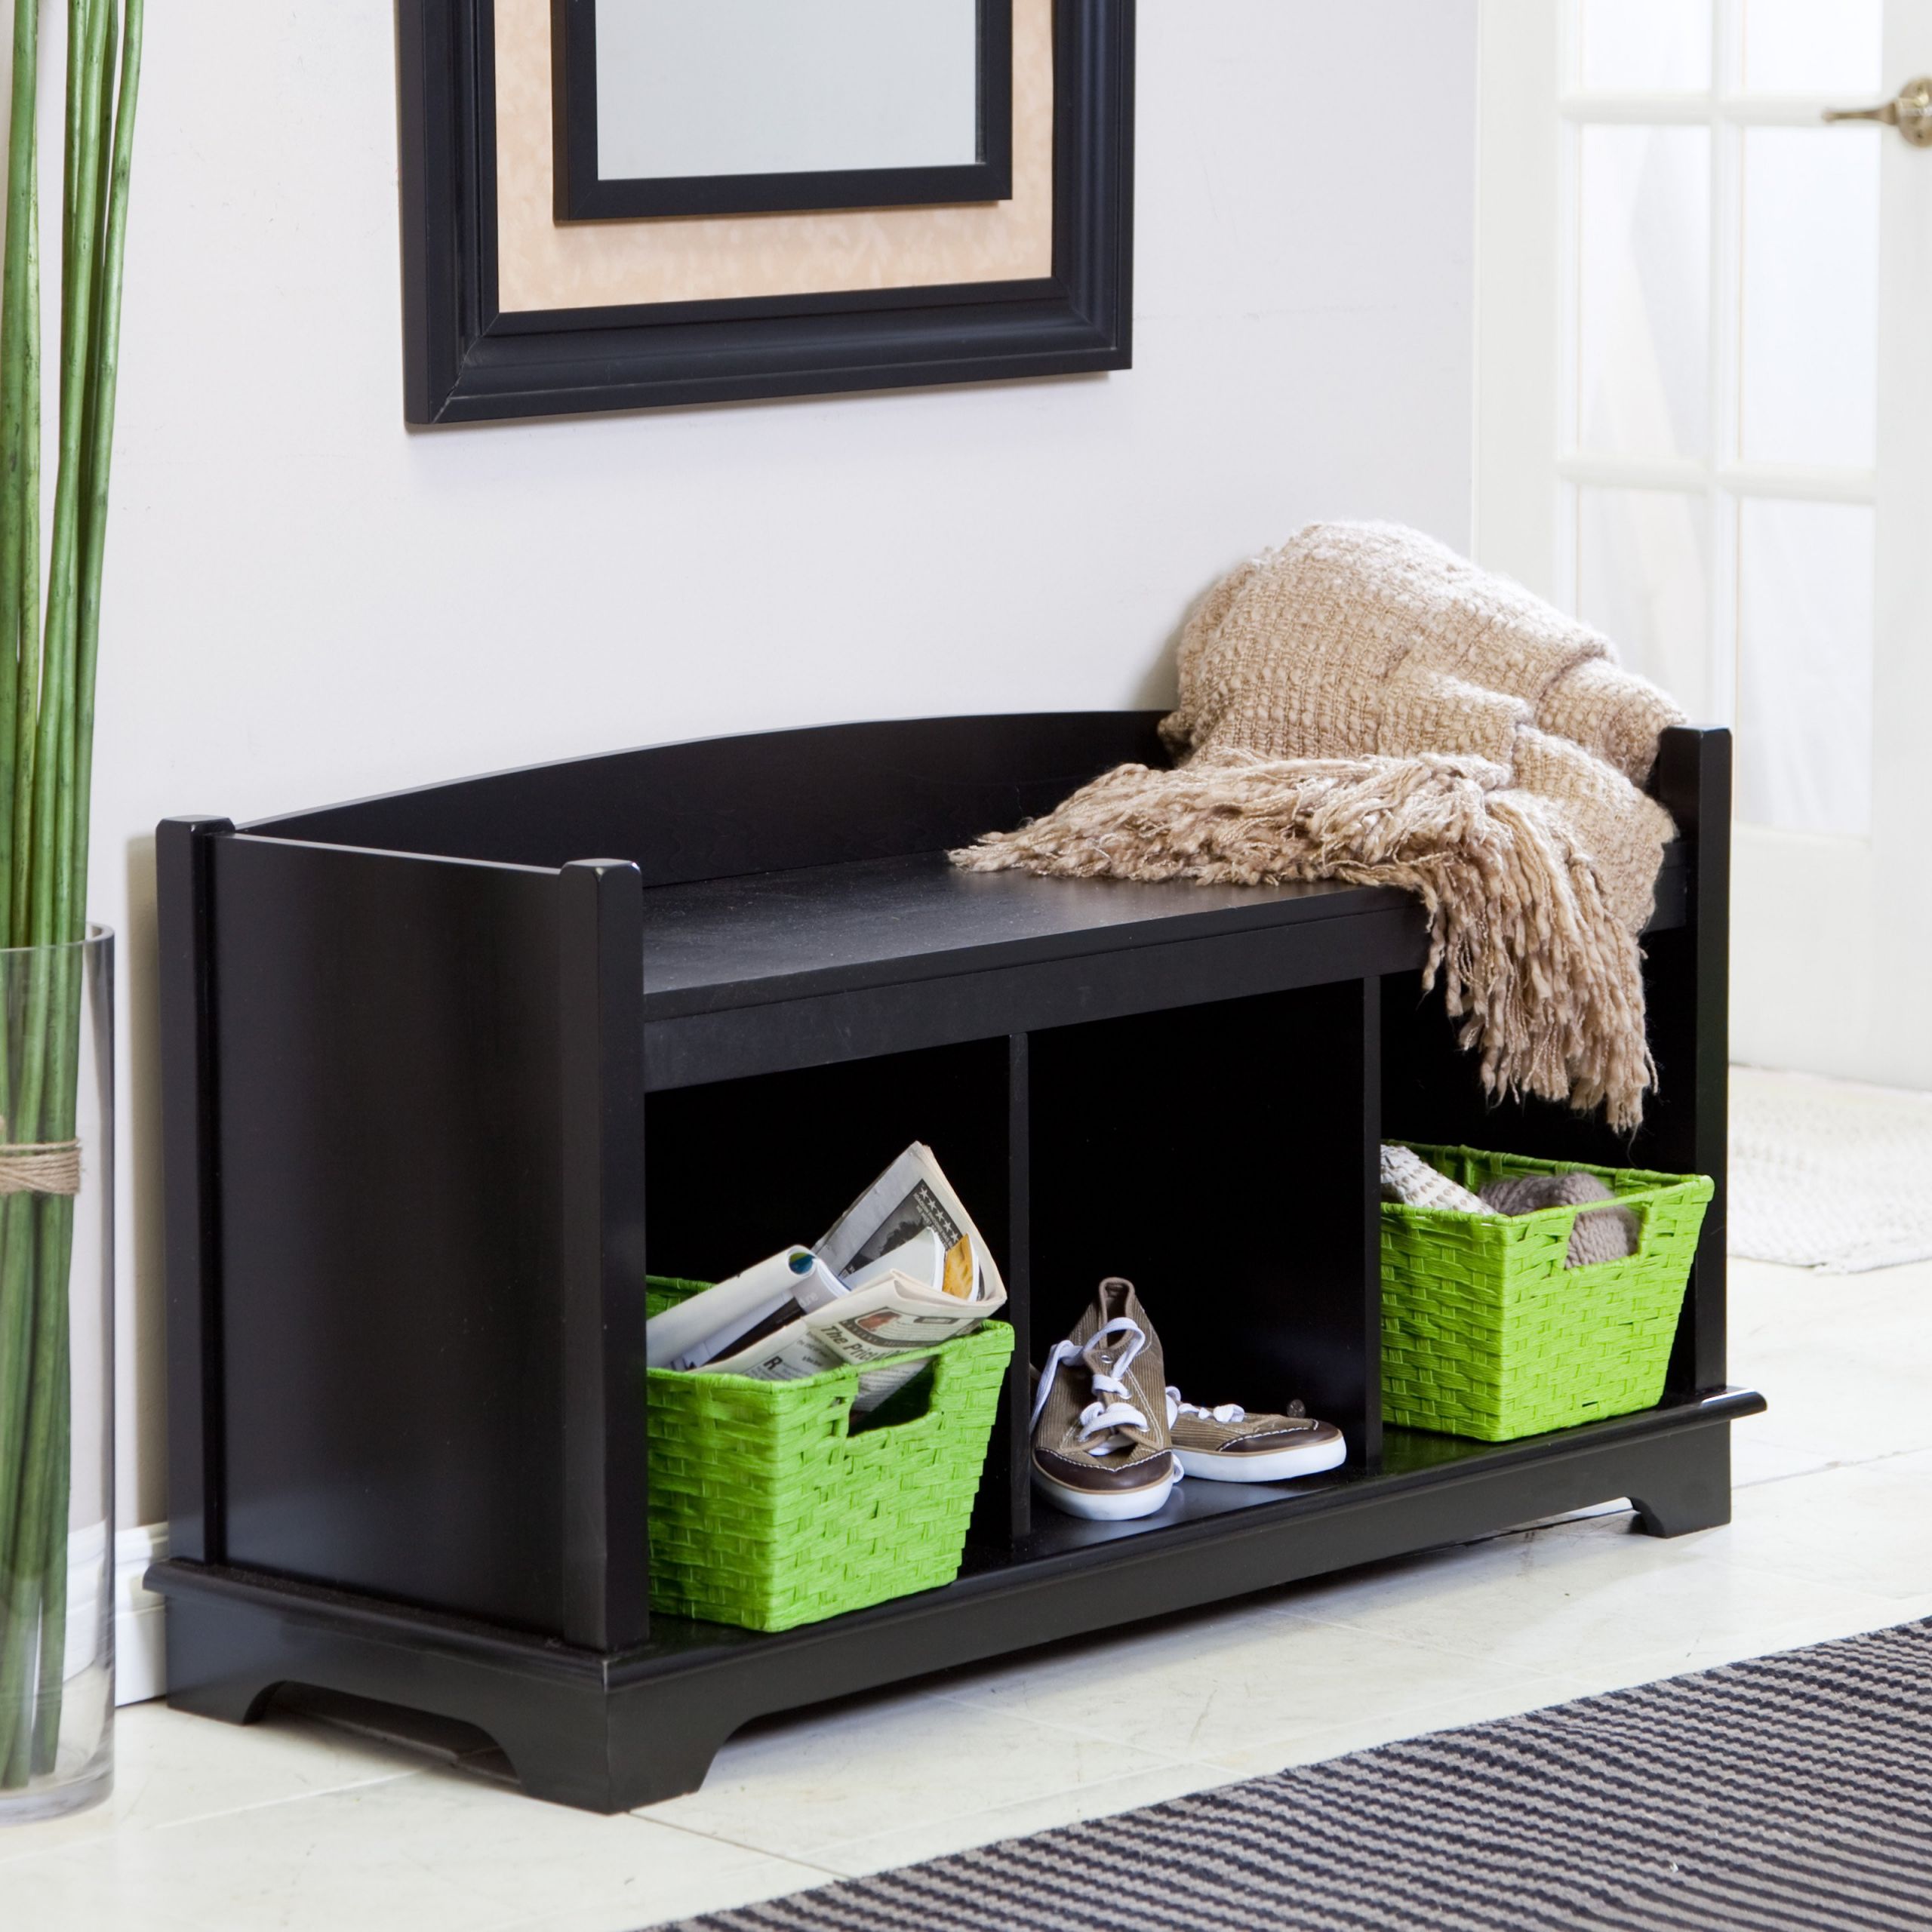 Cubbie Storage Bench
 Entryway Bench With Cubbies